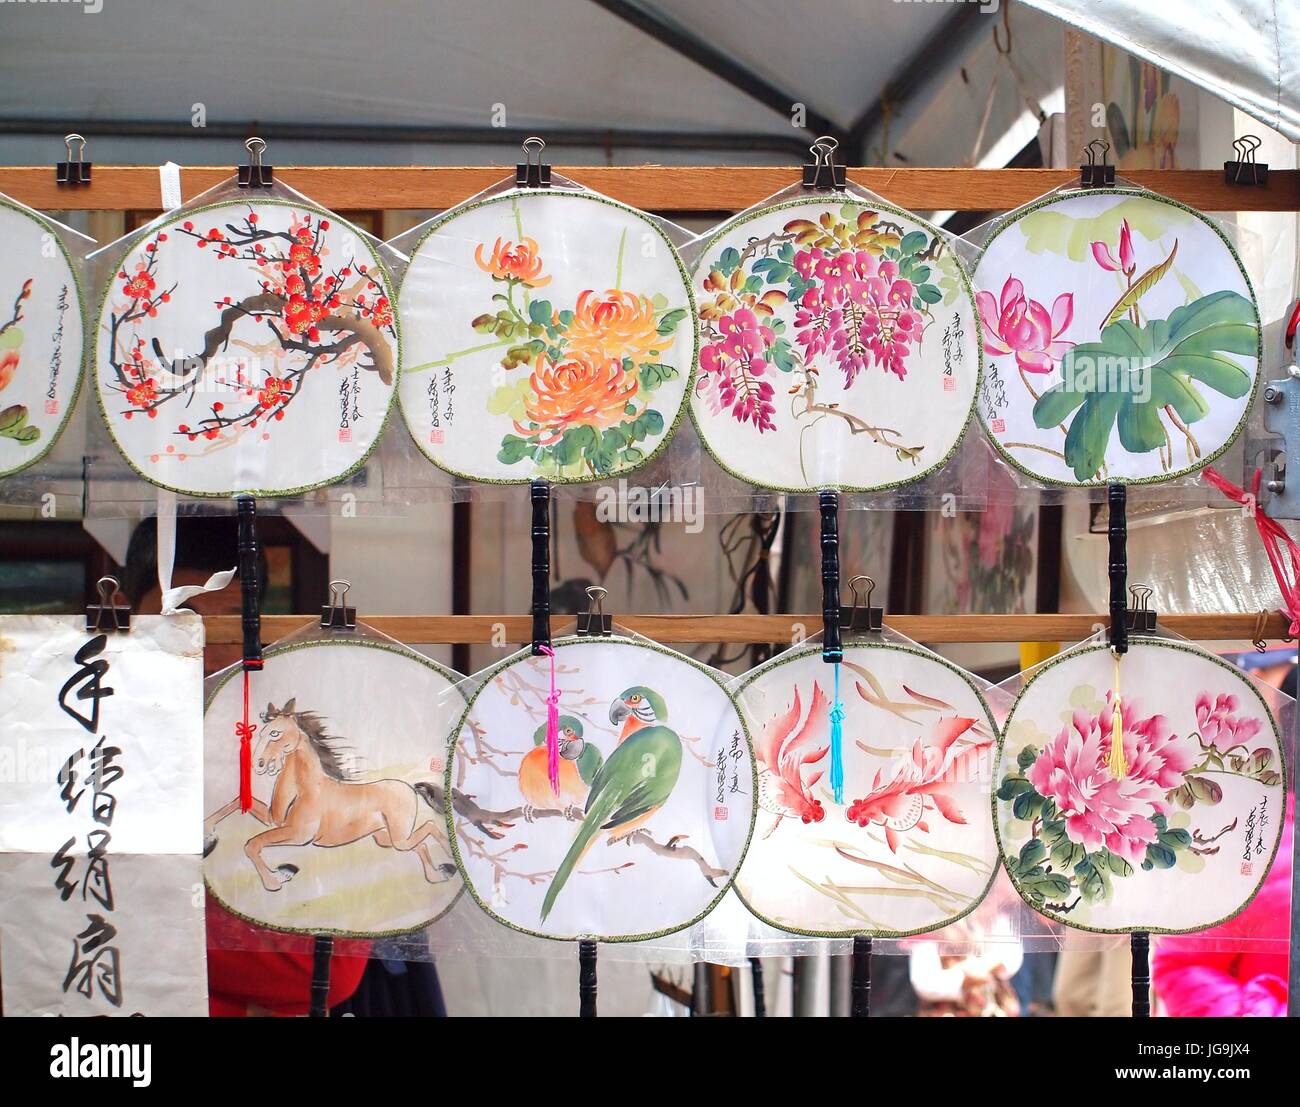 A New Year's outdoor market sells traditional Chinese hand-painted fans Stock Photo